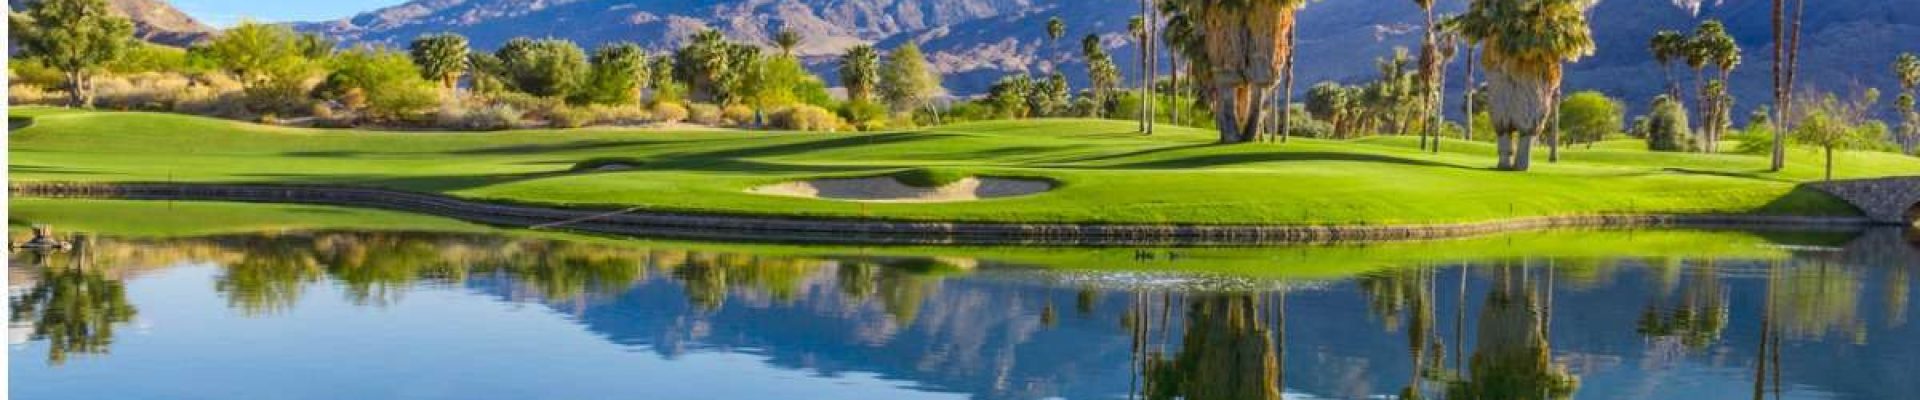 golf-course-in-palm-springs-california-picture-id171586133